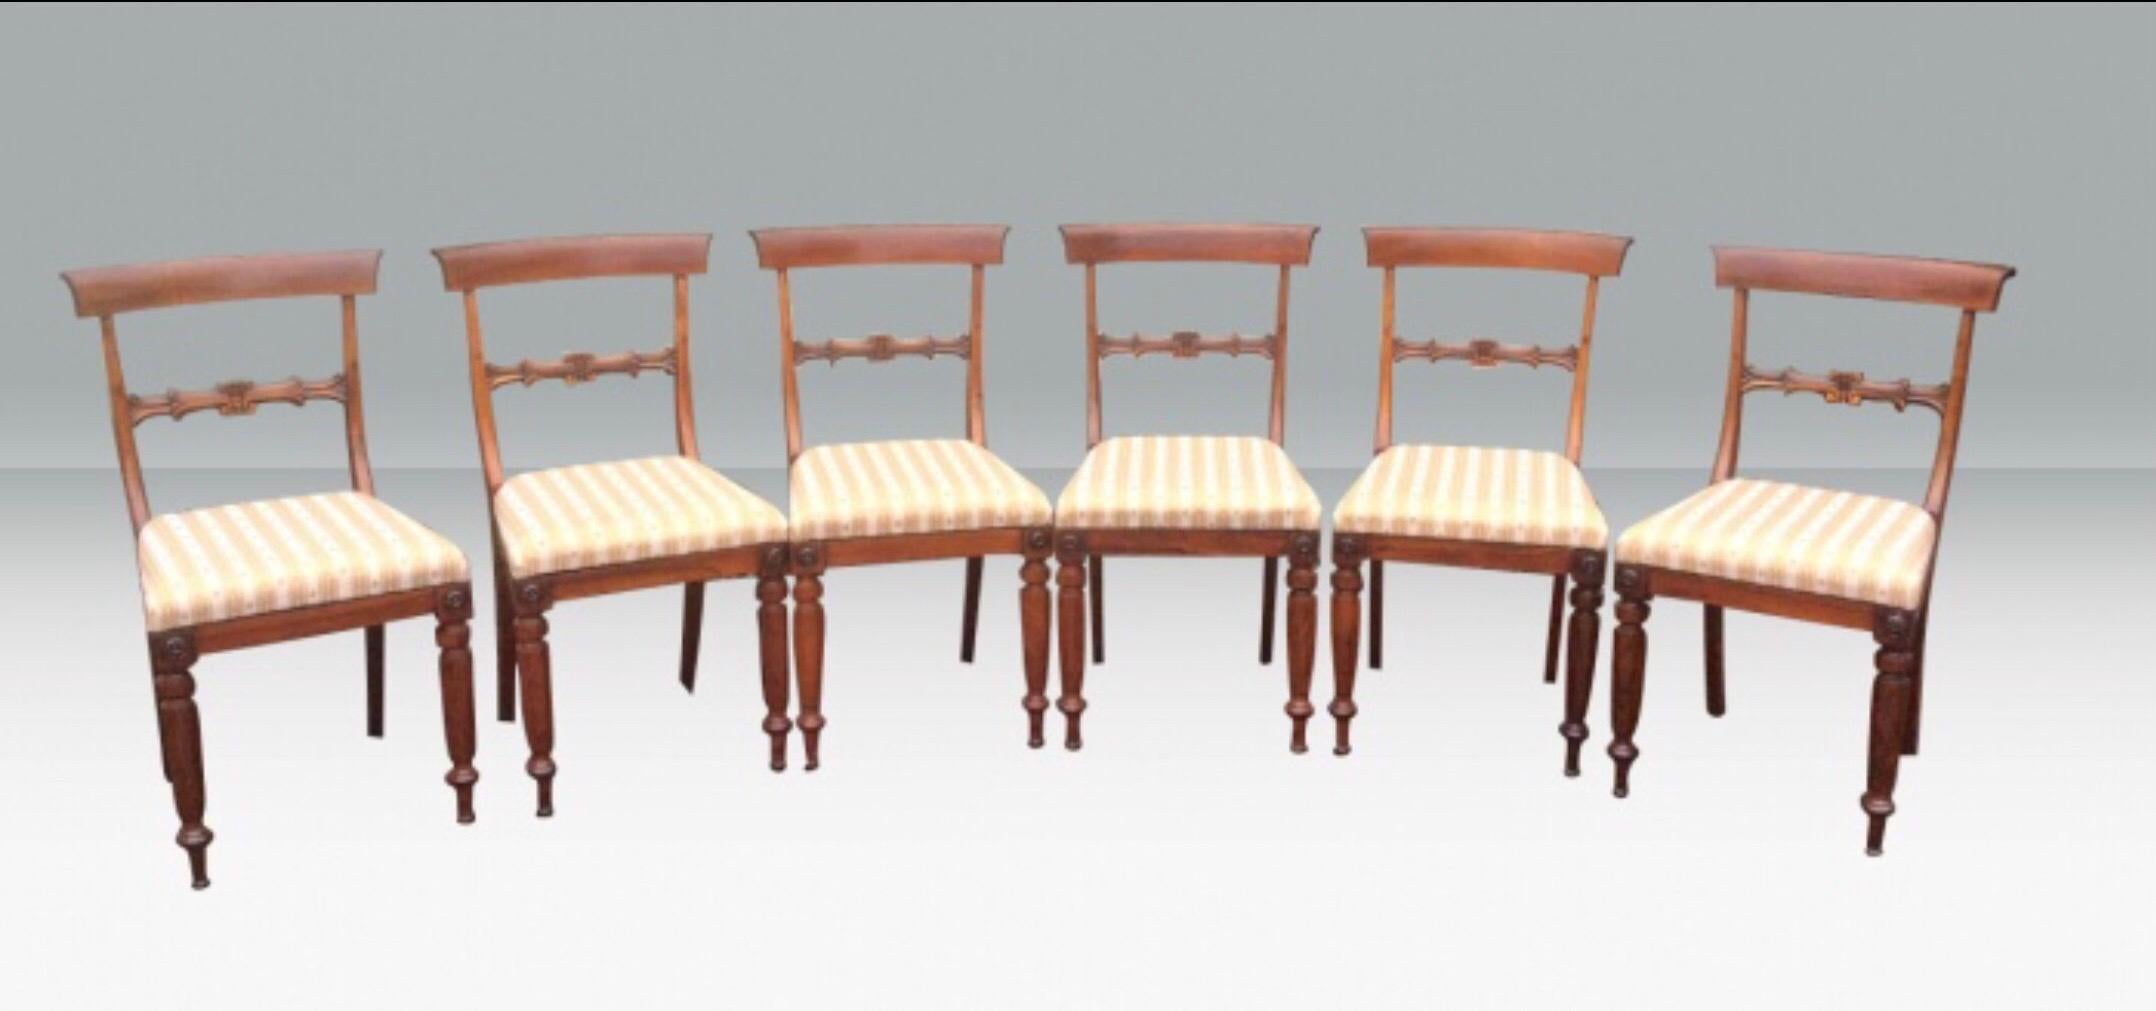 Early 19th Century Set of Six Antique Period Regency Rosewood Dining Chairs